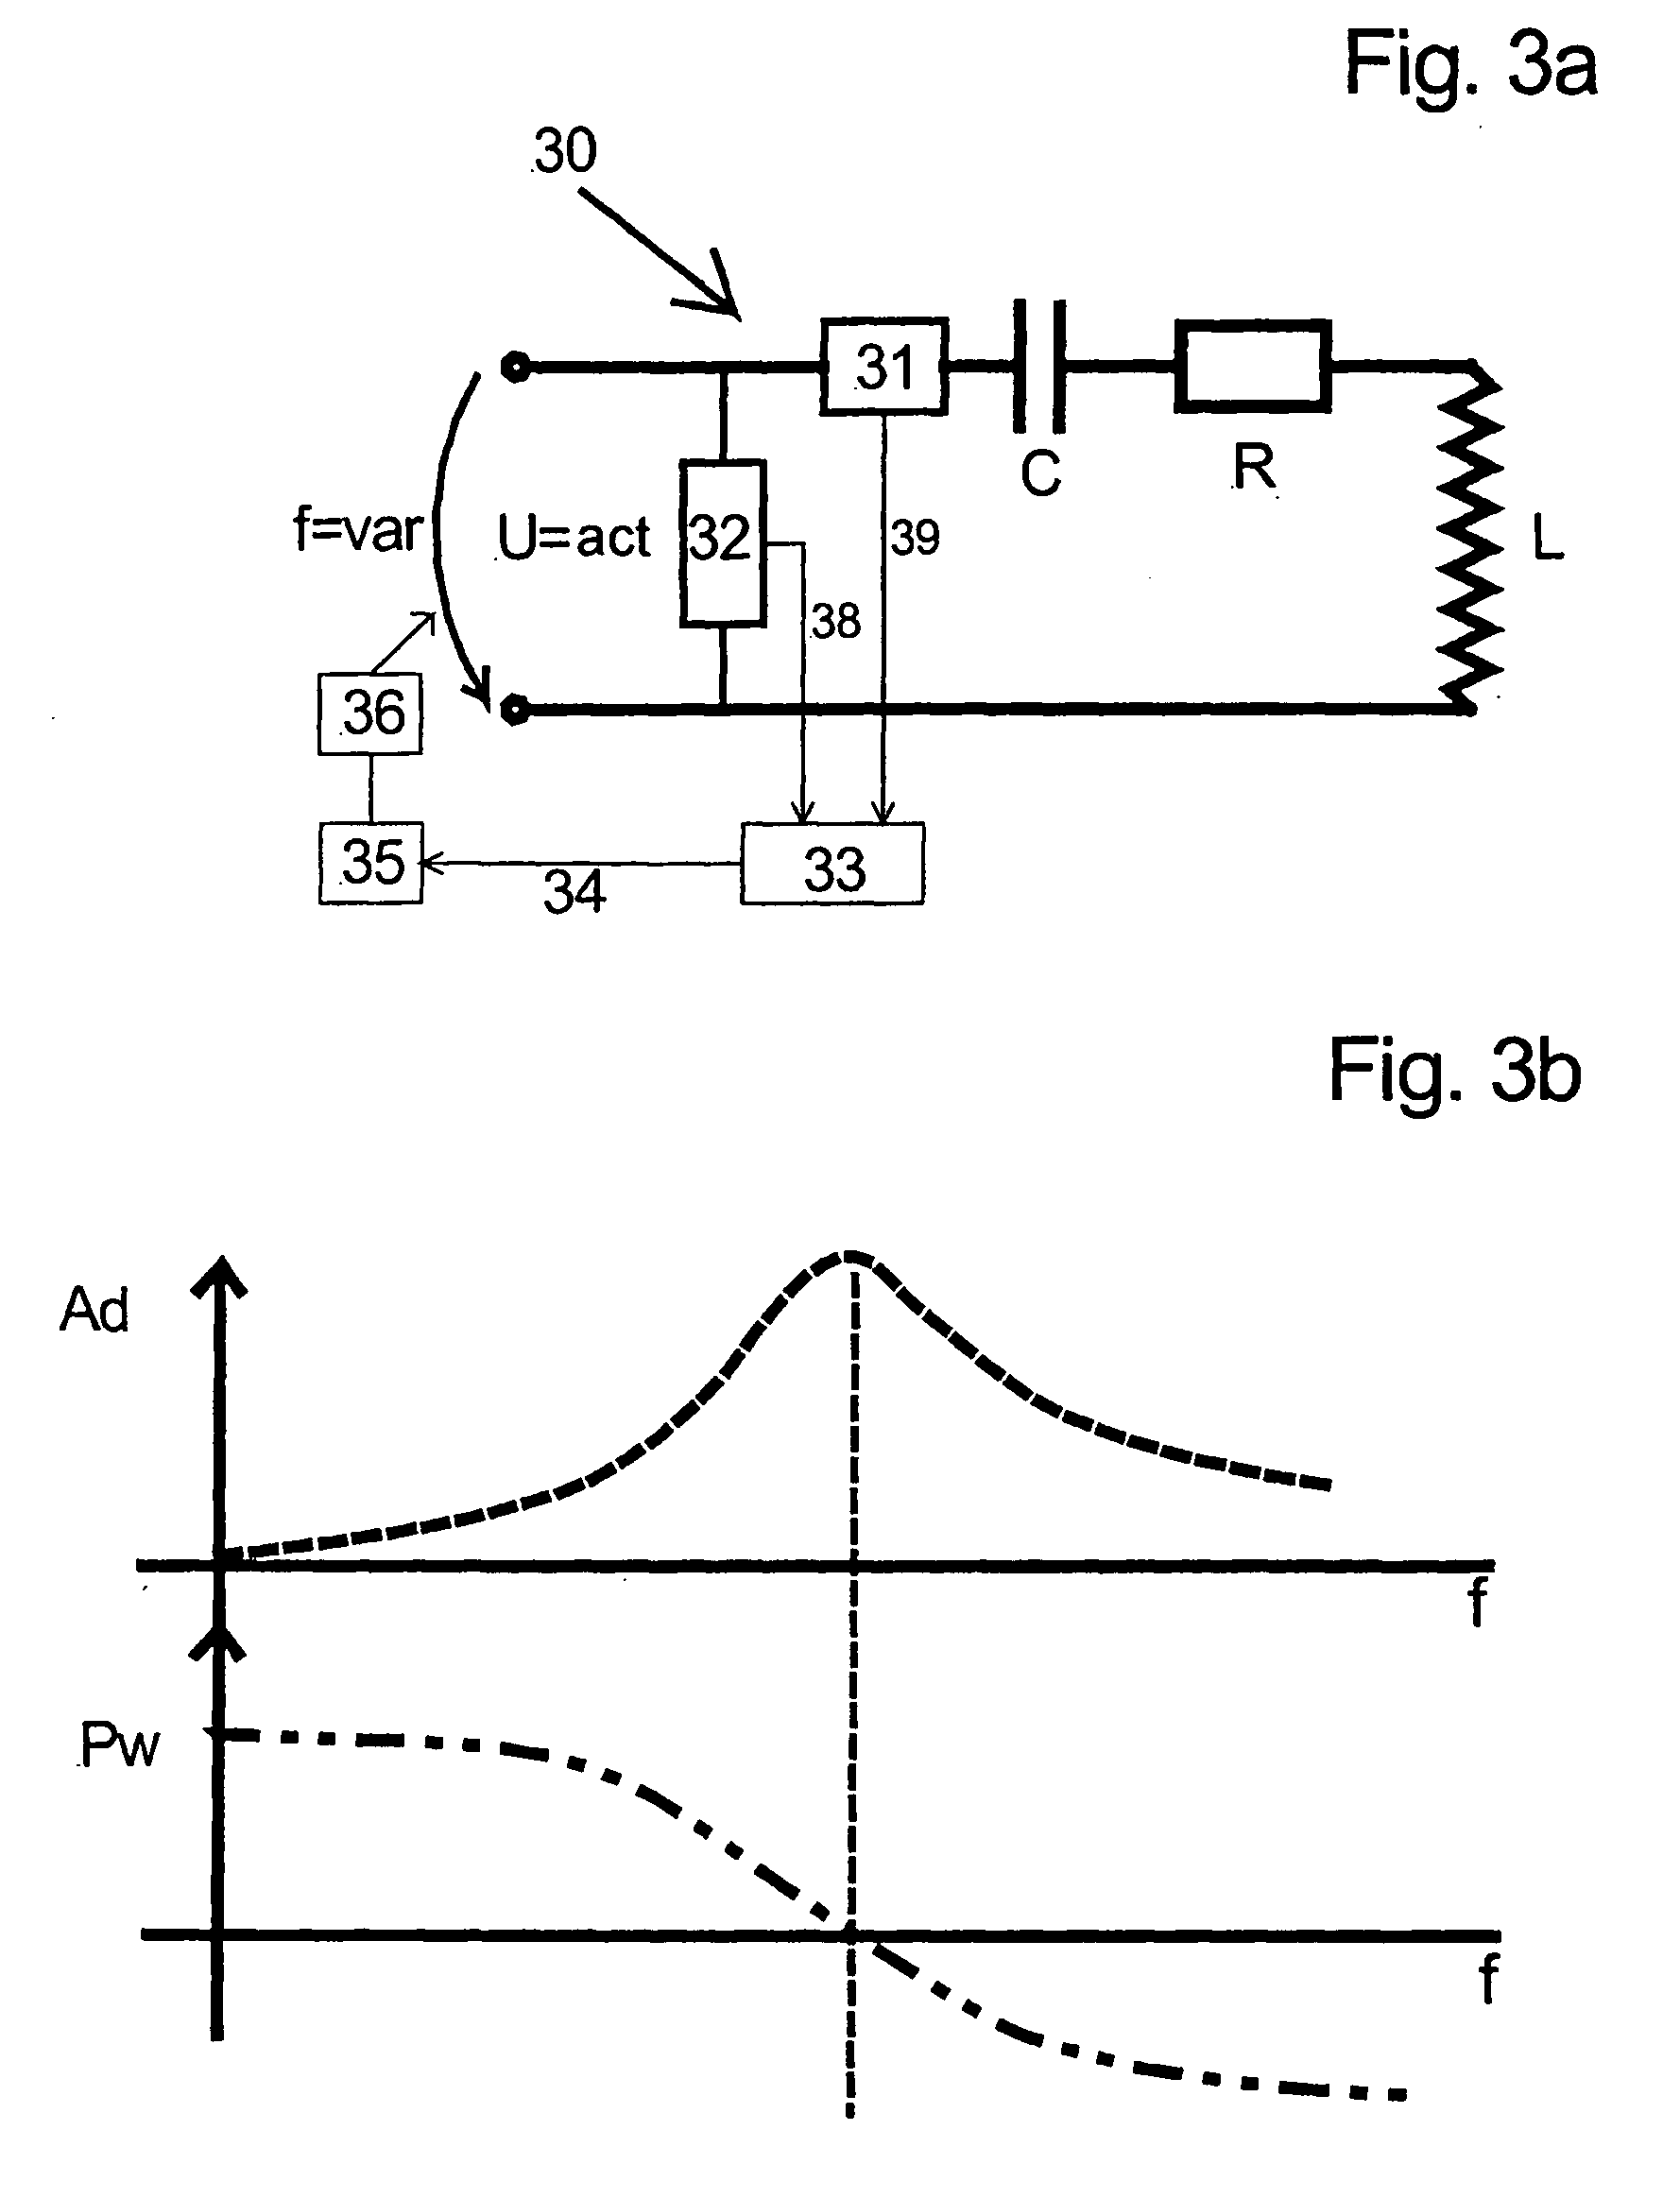 Automatic setting of the resonant frequency on demagnetization of different parts in demagnetization installations